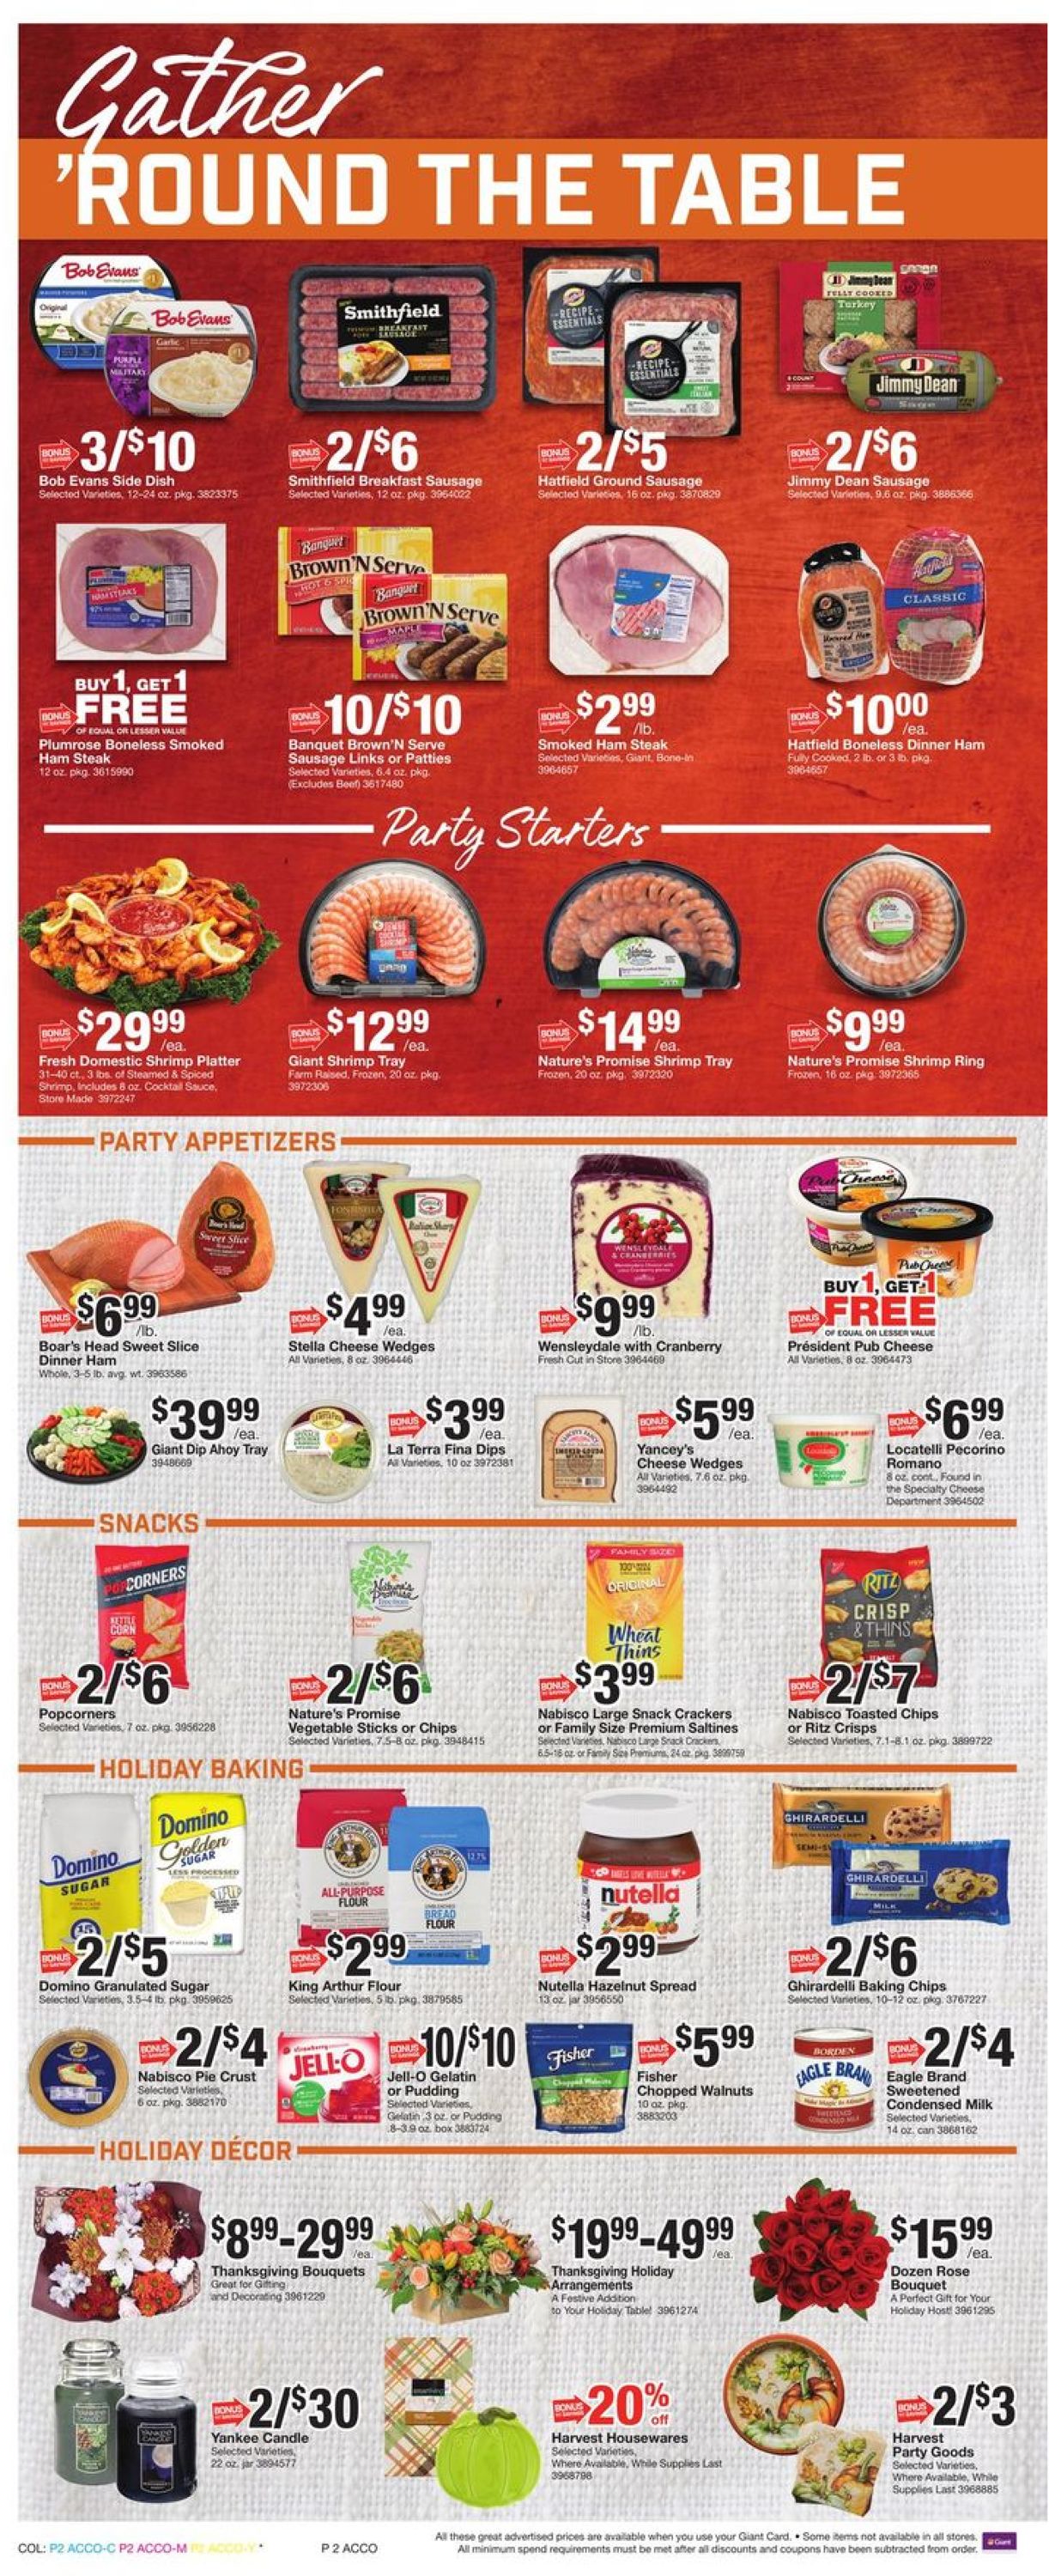 Giant Food - Thanksgiving Ad 2019 Weekly Ad Circular - valid 11/22-11/28/2019 (Page 5)